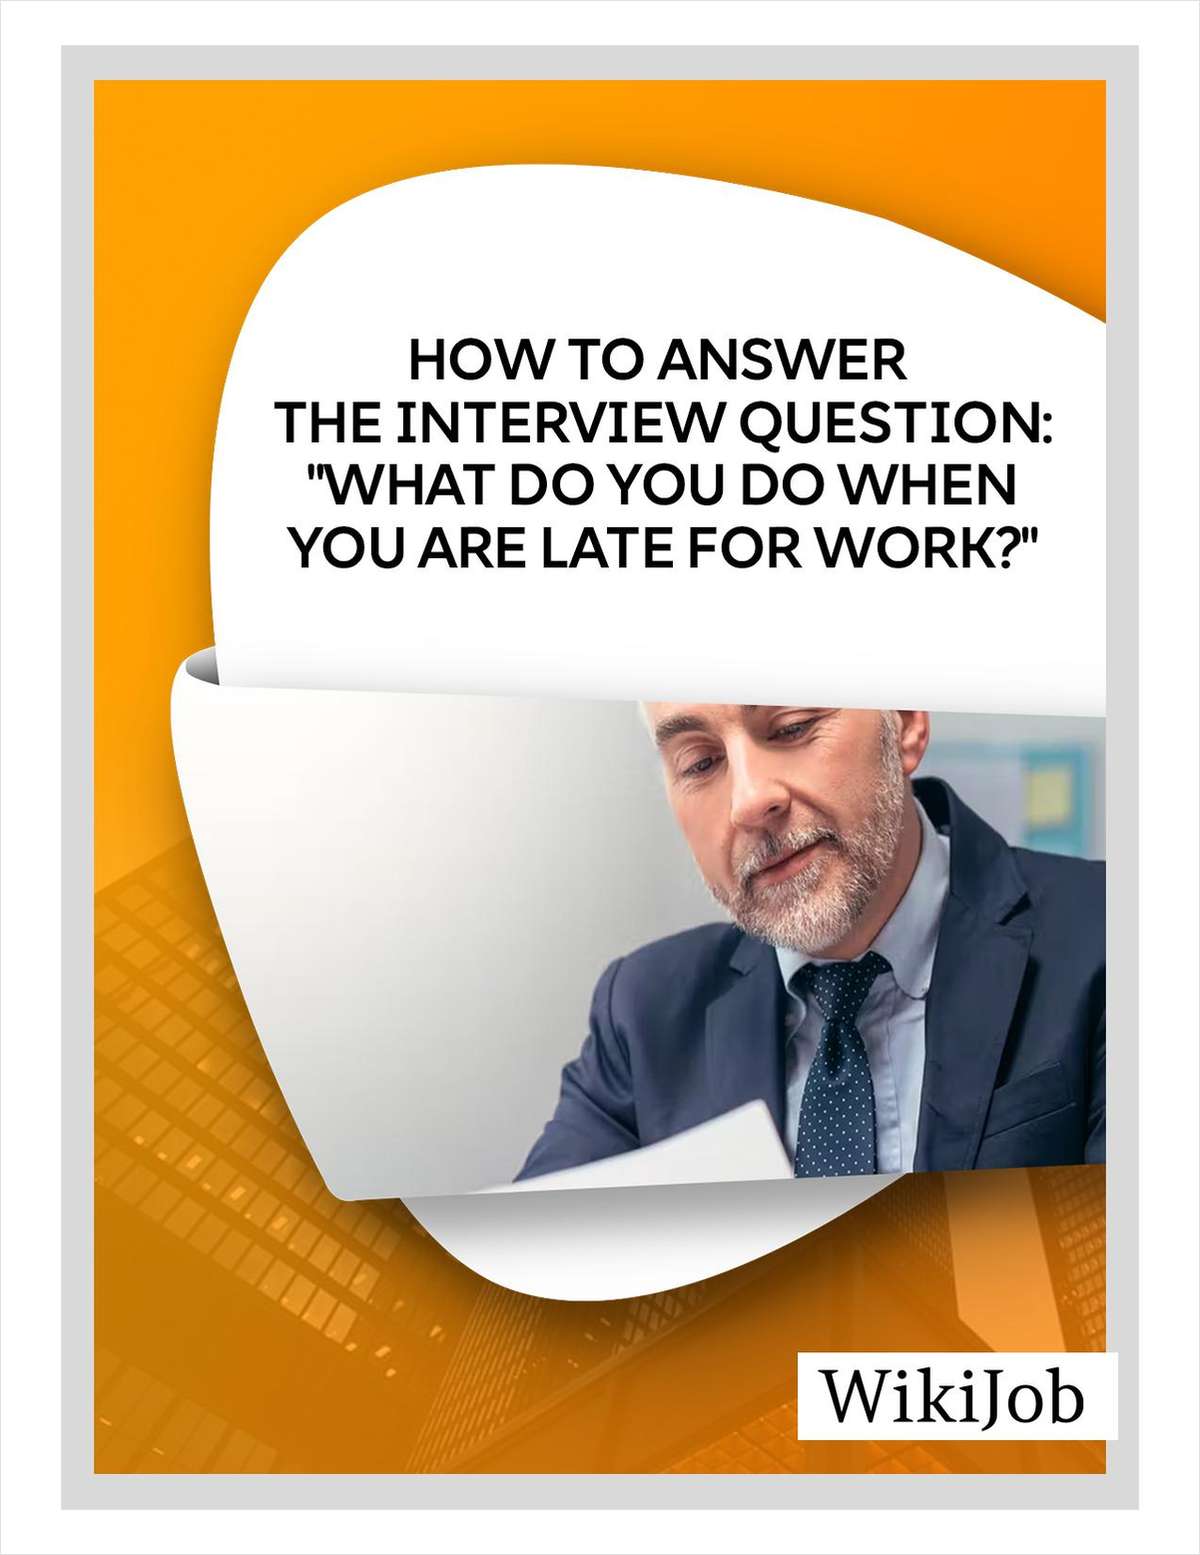 How to Answer the Interview Question: What Do You Do When You Are Late for Work?